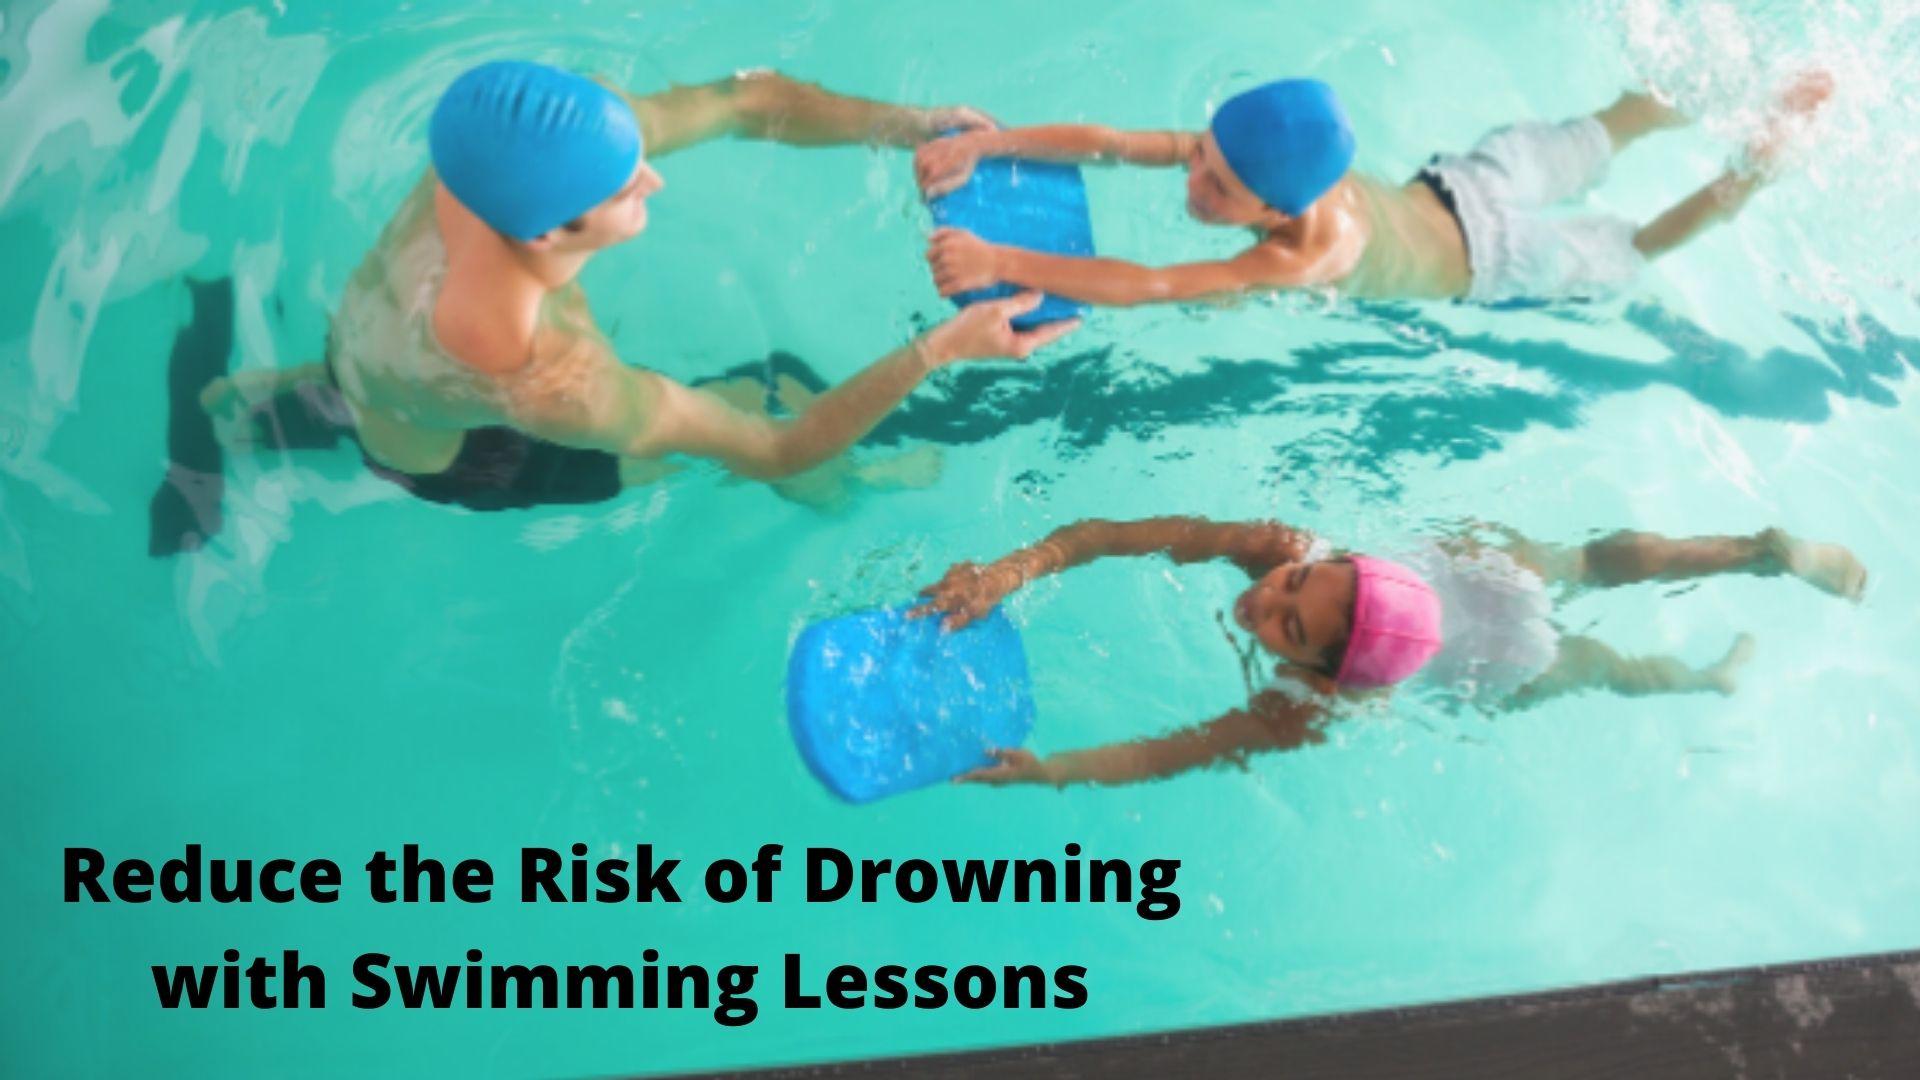 Reduce the Risk of Drowning with Swimming Lessons